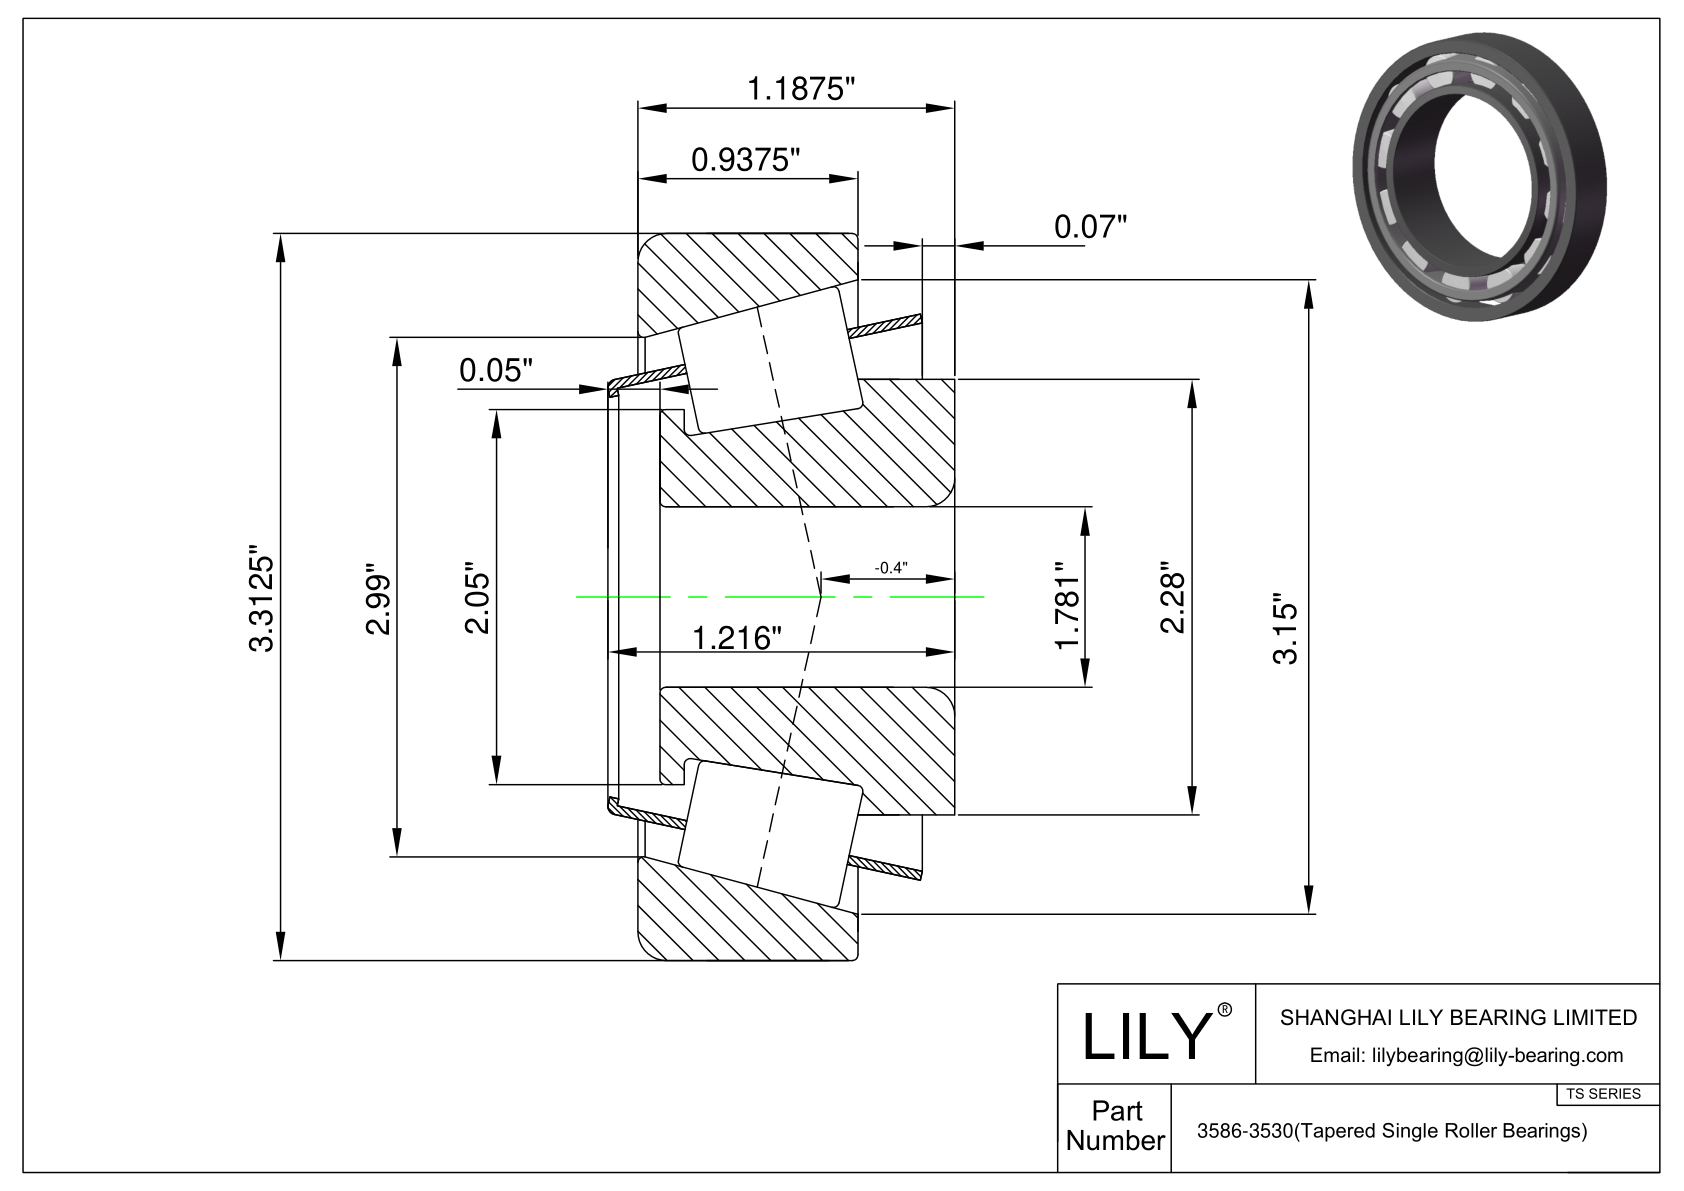 3586-3530 TS (Tapered Single Roller Bearings) (Imperial) cad drawing